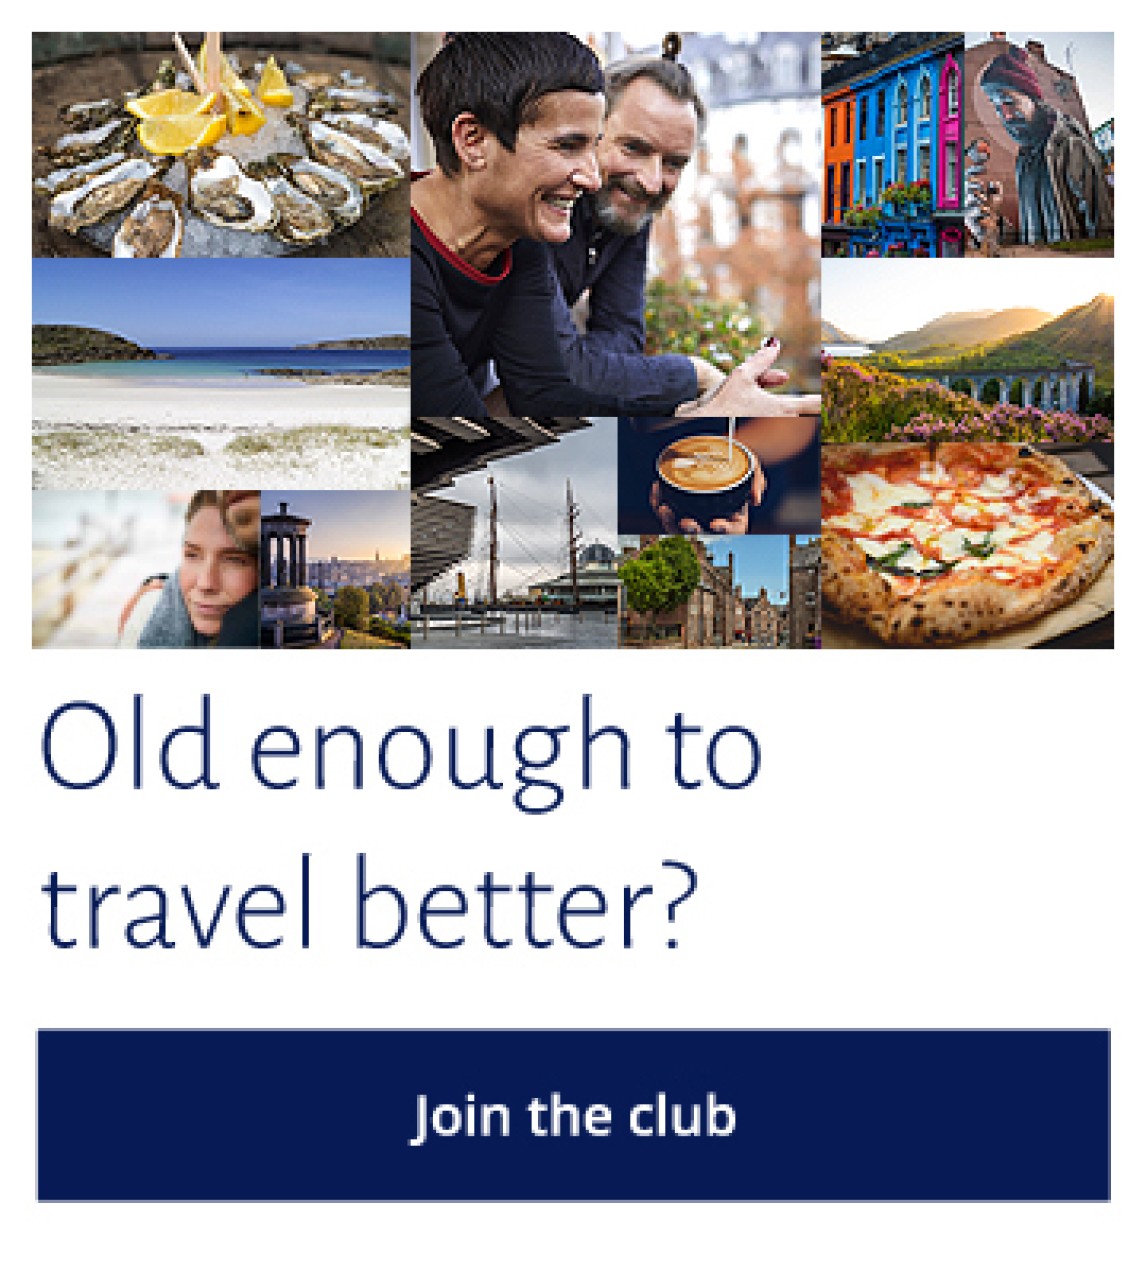 Images of Scotland highlights with text "Old enough to travel better? Join the Club."